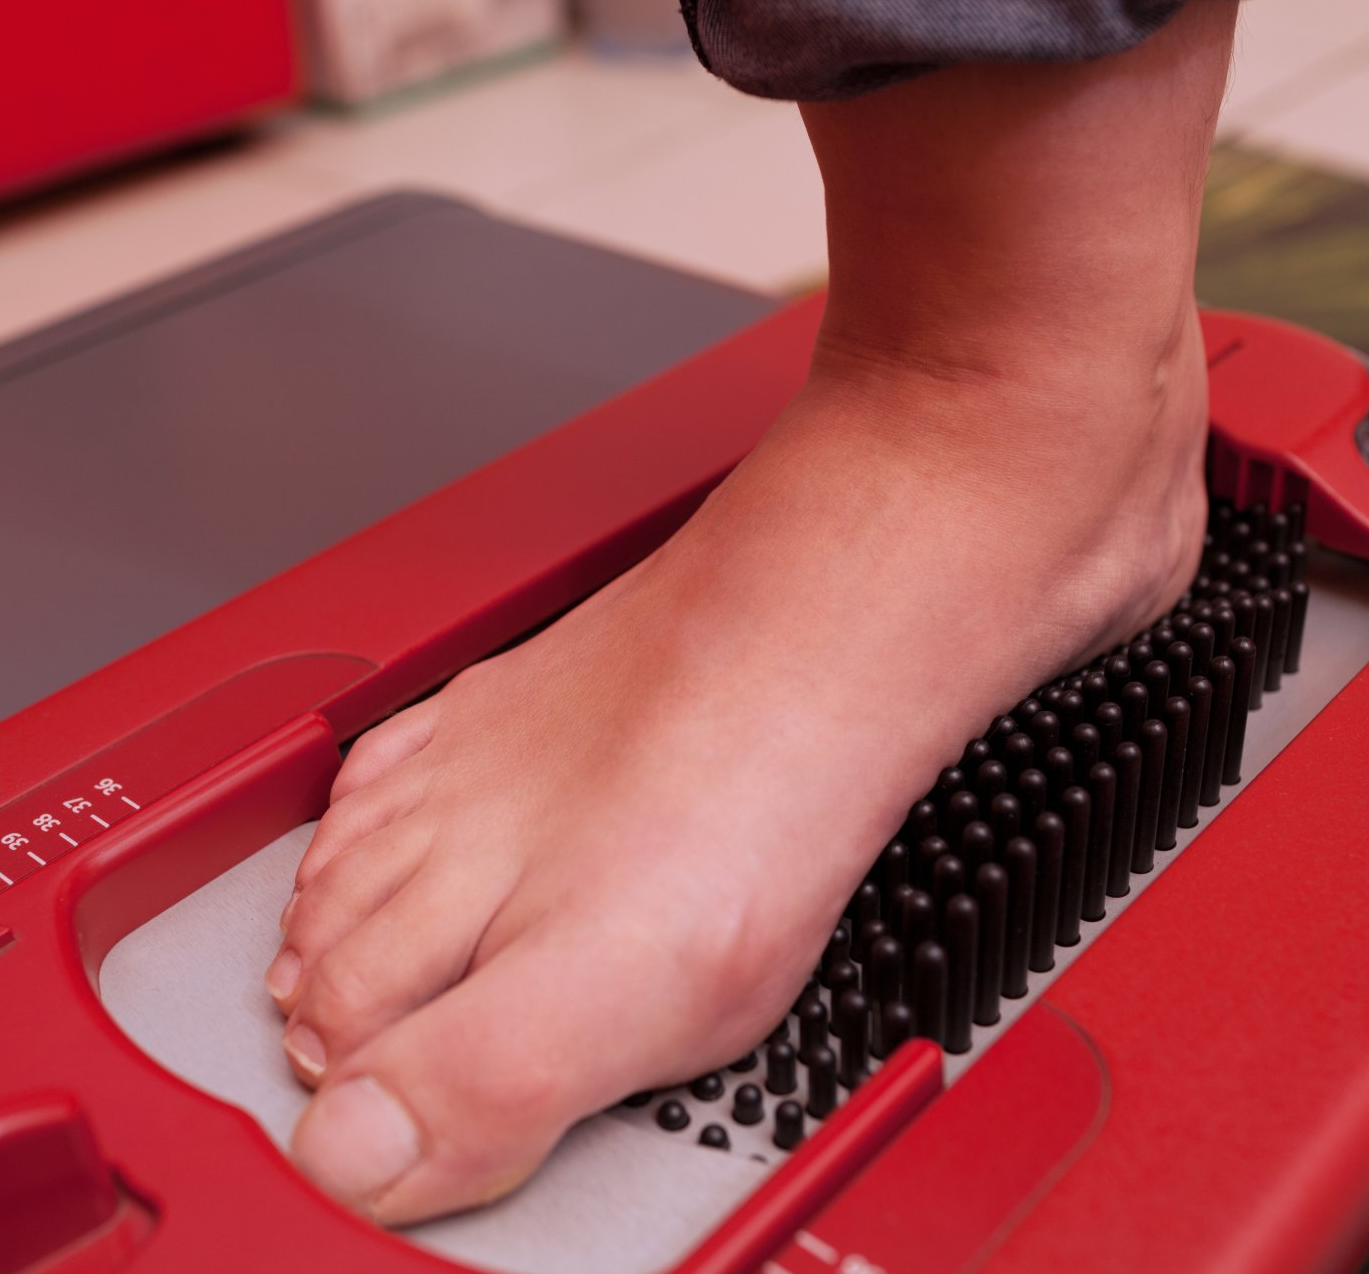 A foot being scanned on a device for orthotics